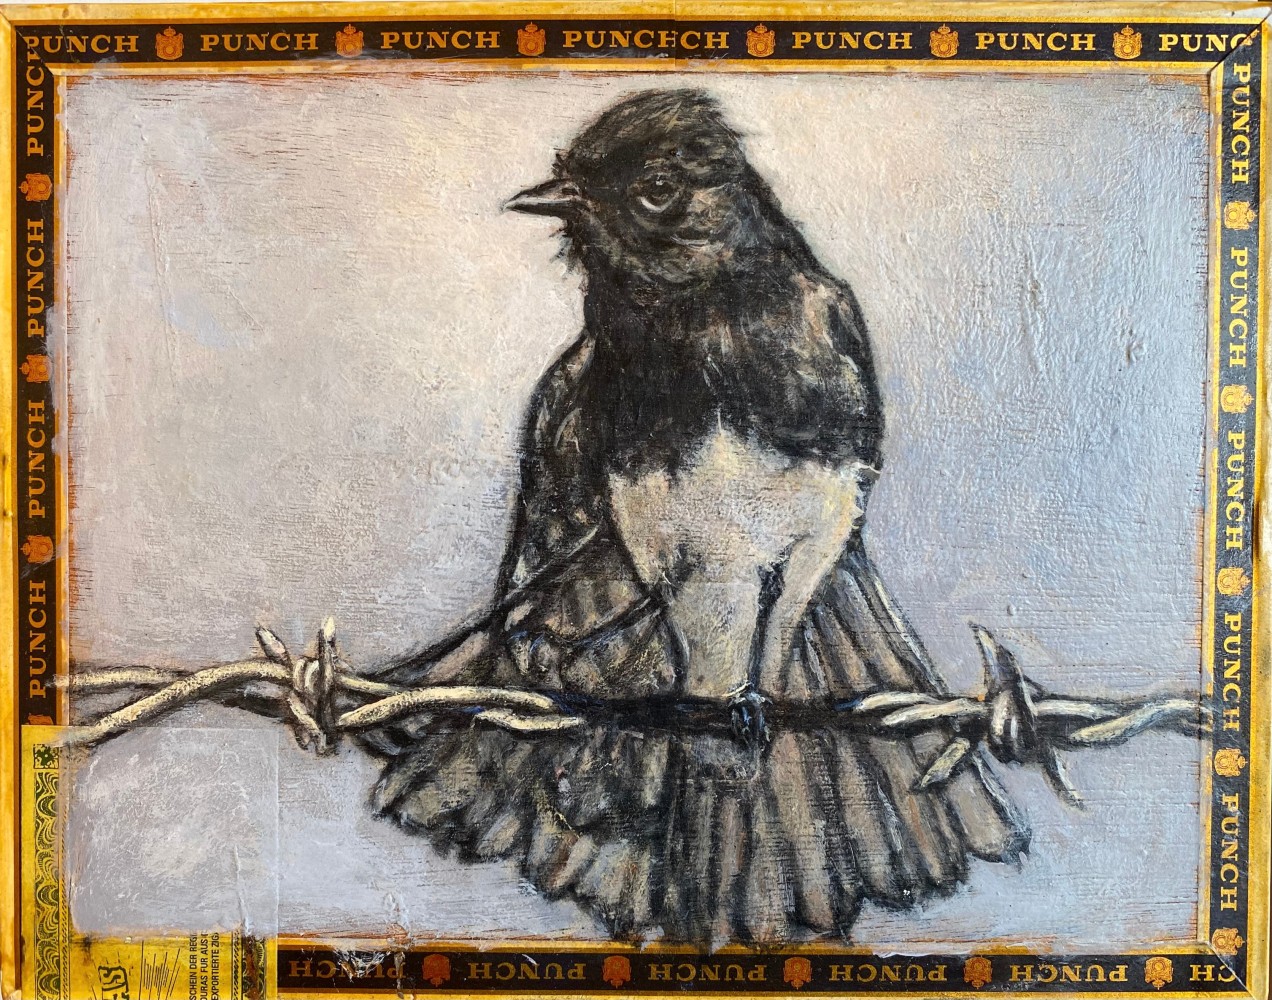 Ed Musante Black Phoebe / Punch, 2014 mixed media on cigar box 7 3/4 x 9 7/8 x 1 7/8 in.